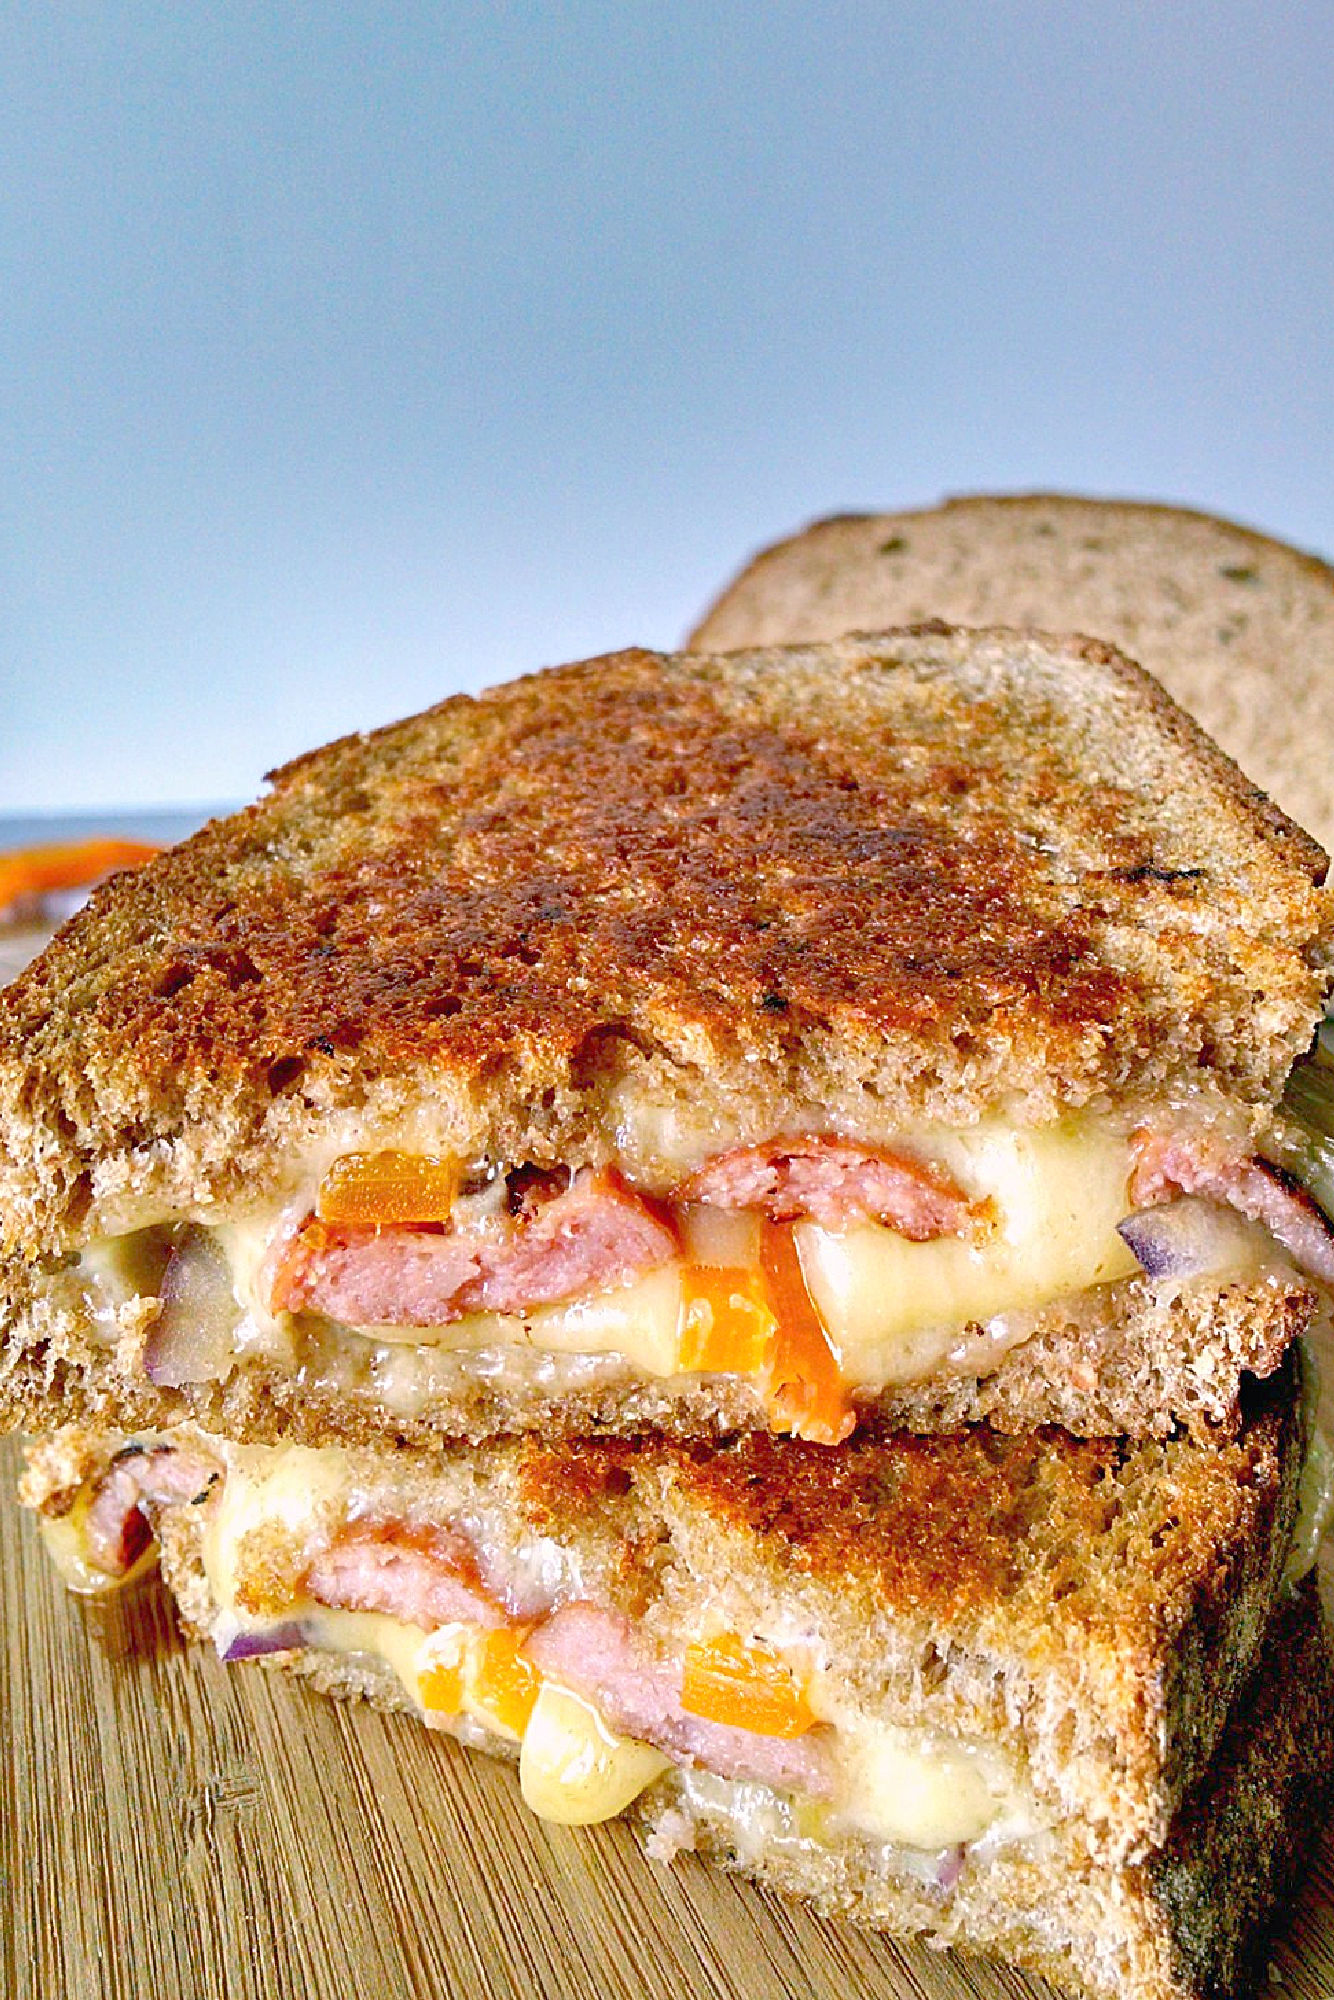 Kielbasa, onions, and peppers are melted Monterey Jack in this simple Saturday Kielbasa Grilled Cheese. Monterey Jack cheese has a delicious sharpness that pairs well with the smoky sausage, sweet peppers, and red onions. #GrilledCheeseMonth #kielbasa #sandwich #grilledcheeselover